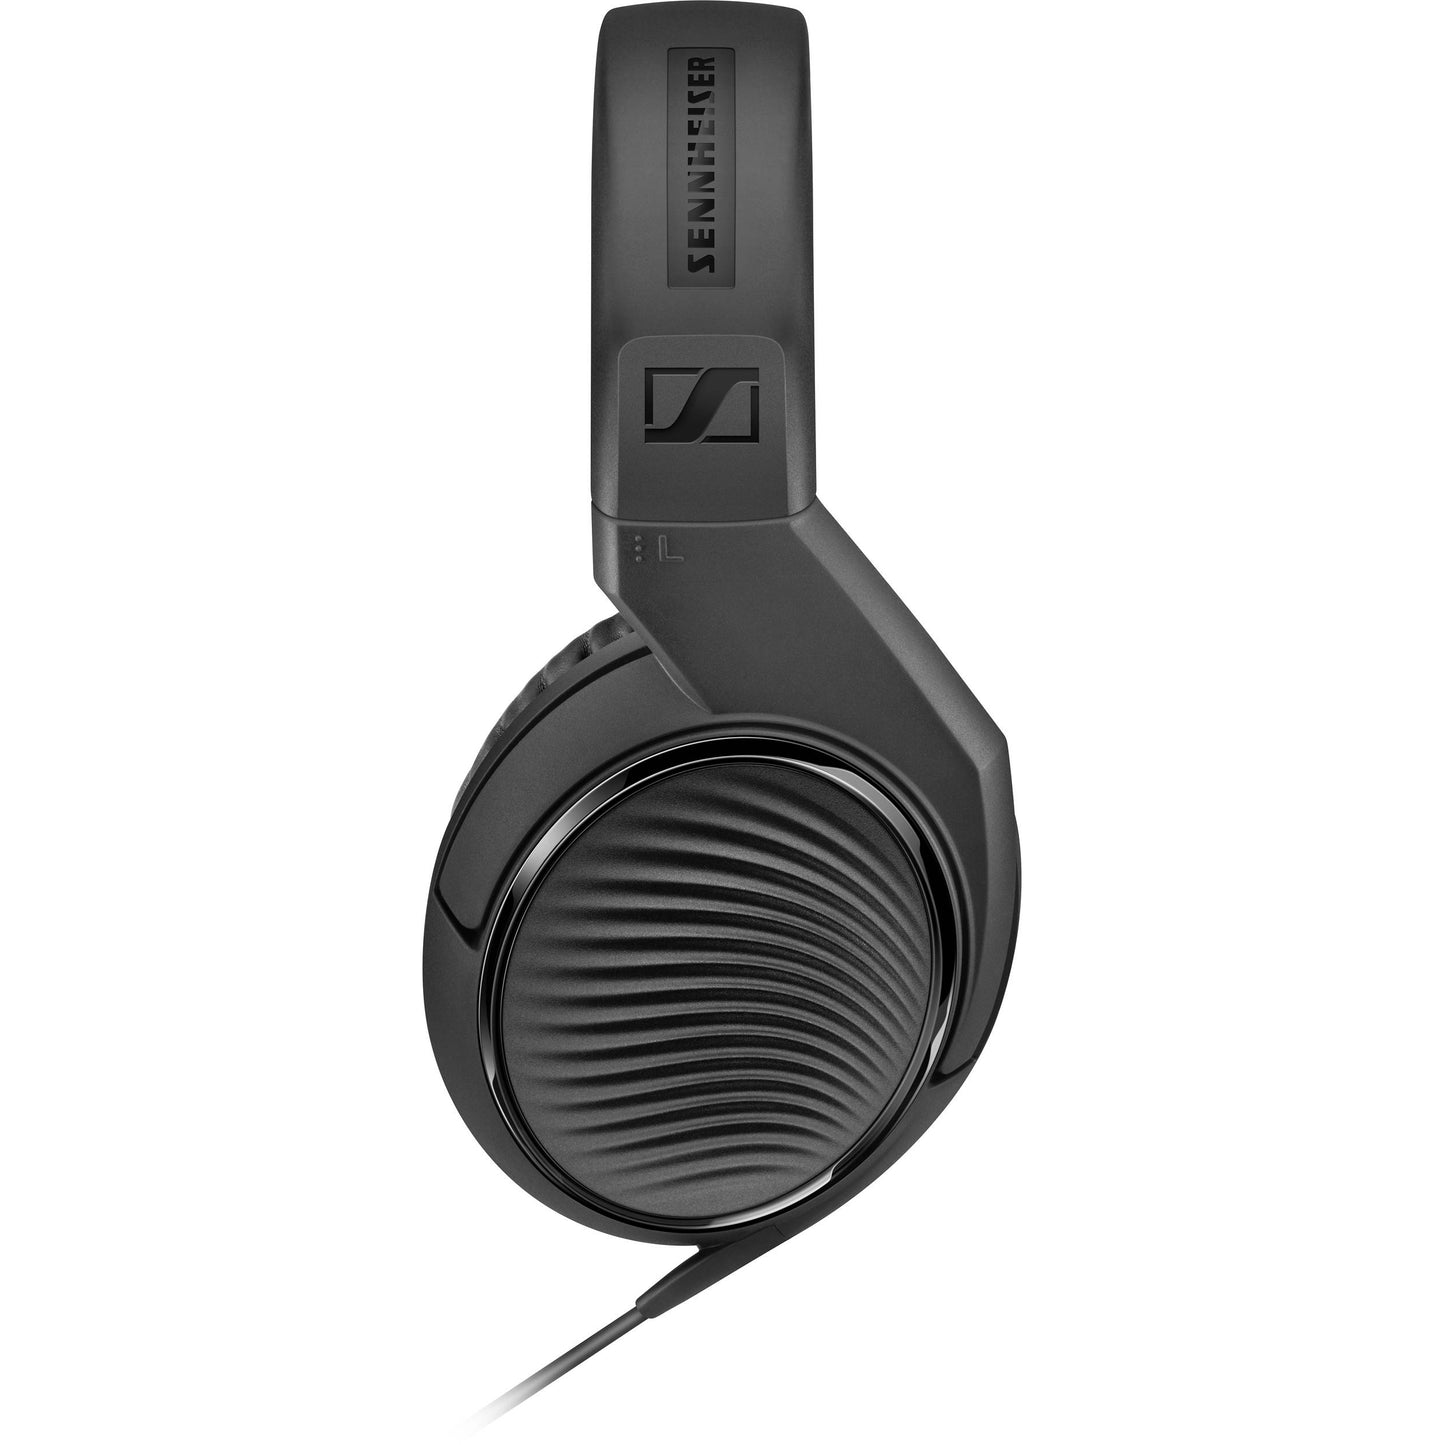 Sennheiser HD 200 Pro Professional Monitoring Headphones Closed-back Around-ear with Noise Reduction Stereo Jack Adapter for Studio Stage